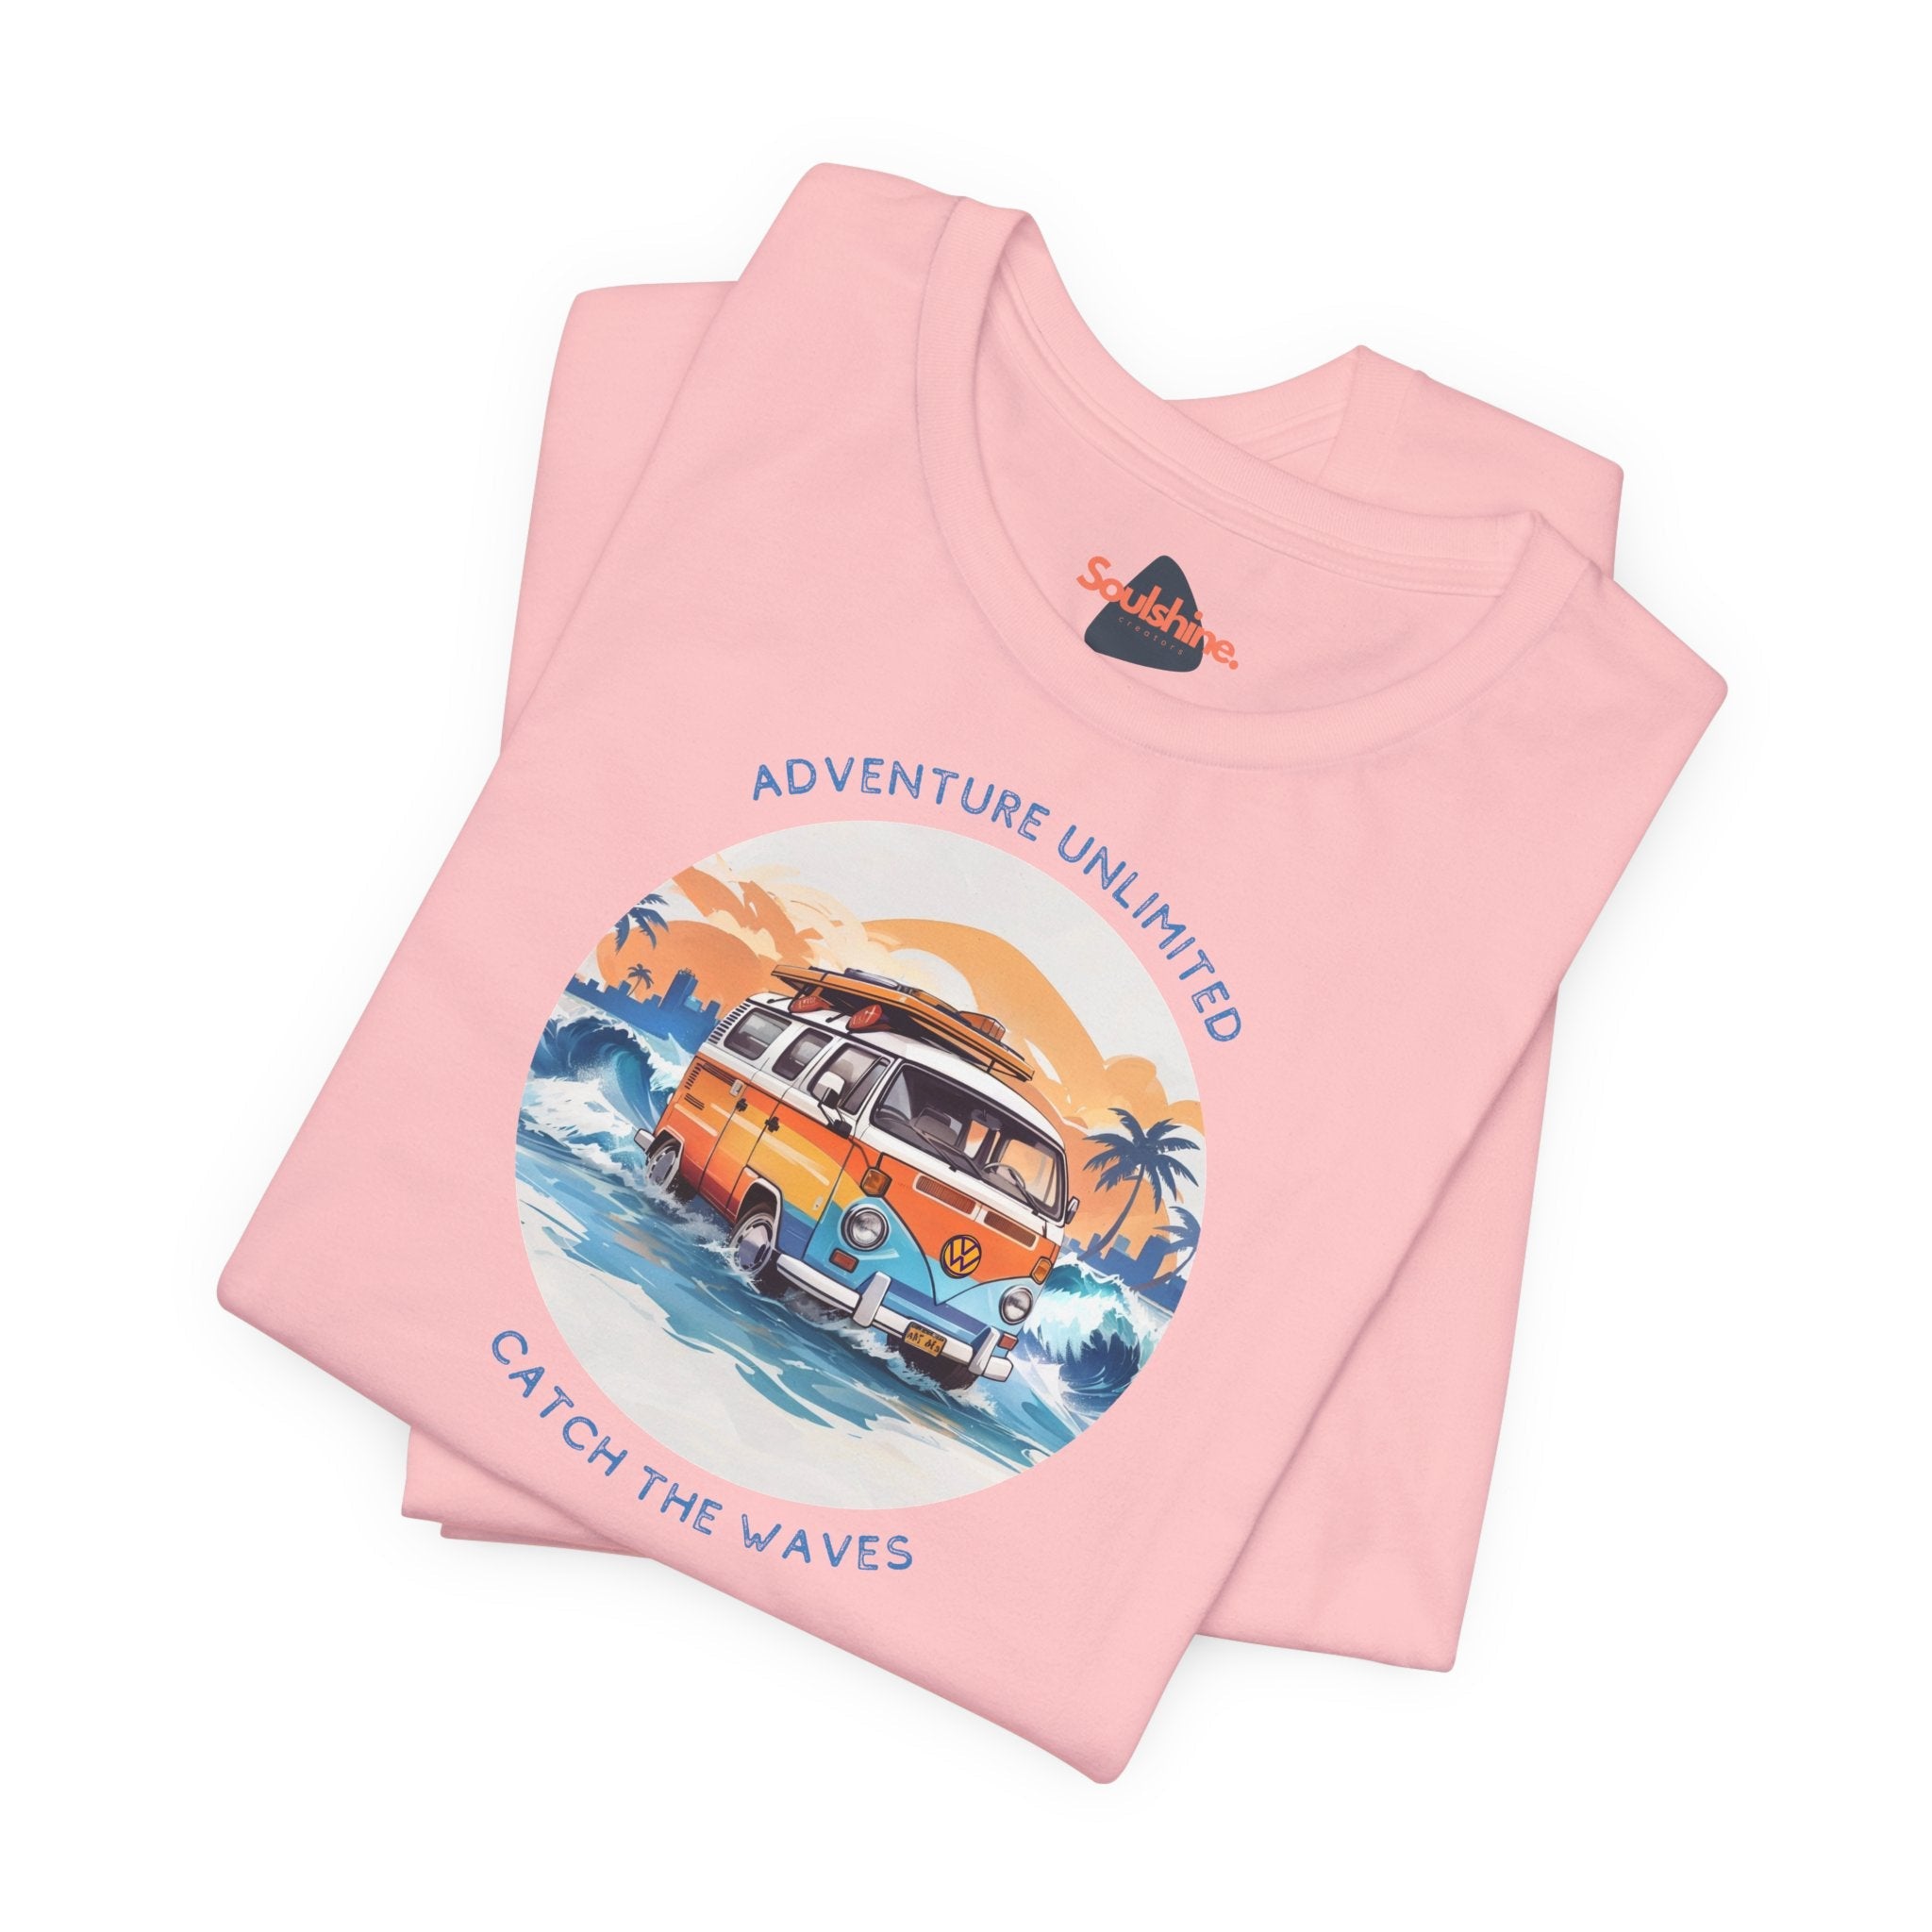 Adventure Unlimited Surfing T-Shirt with Van Driving through Ocean printed on Bella & Canvas shirt